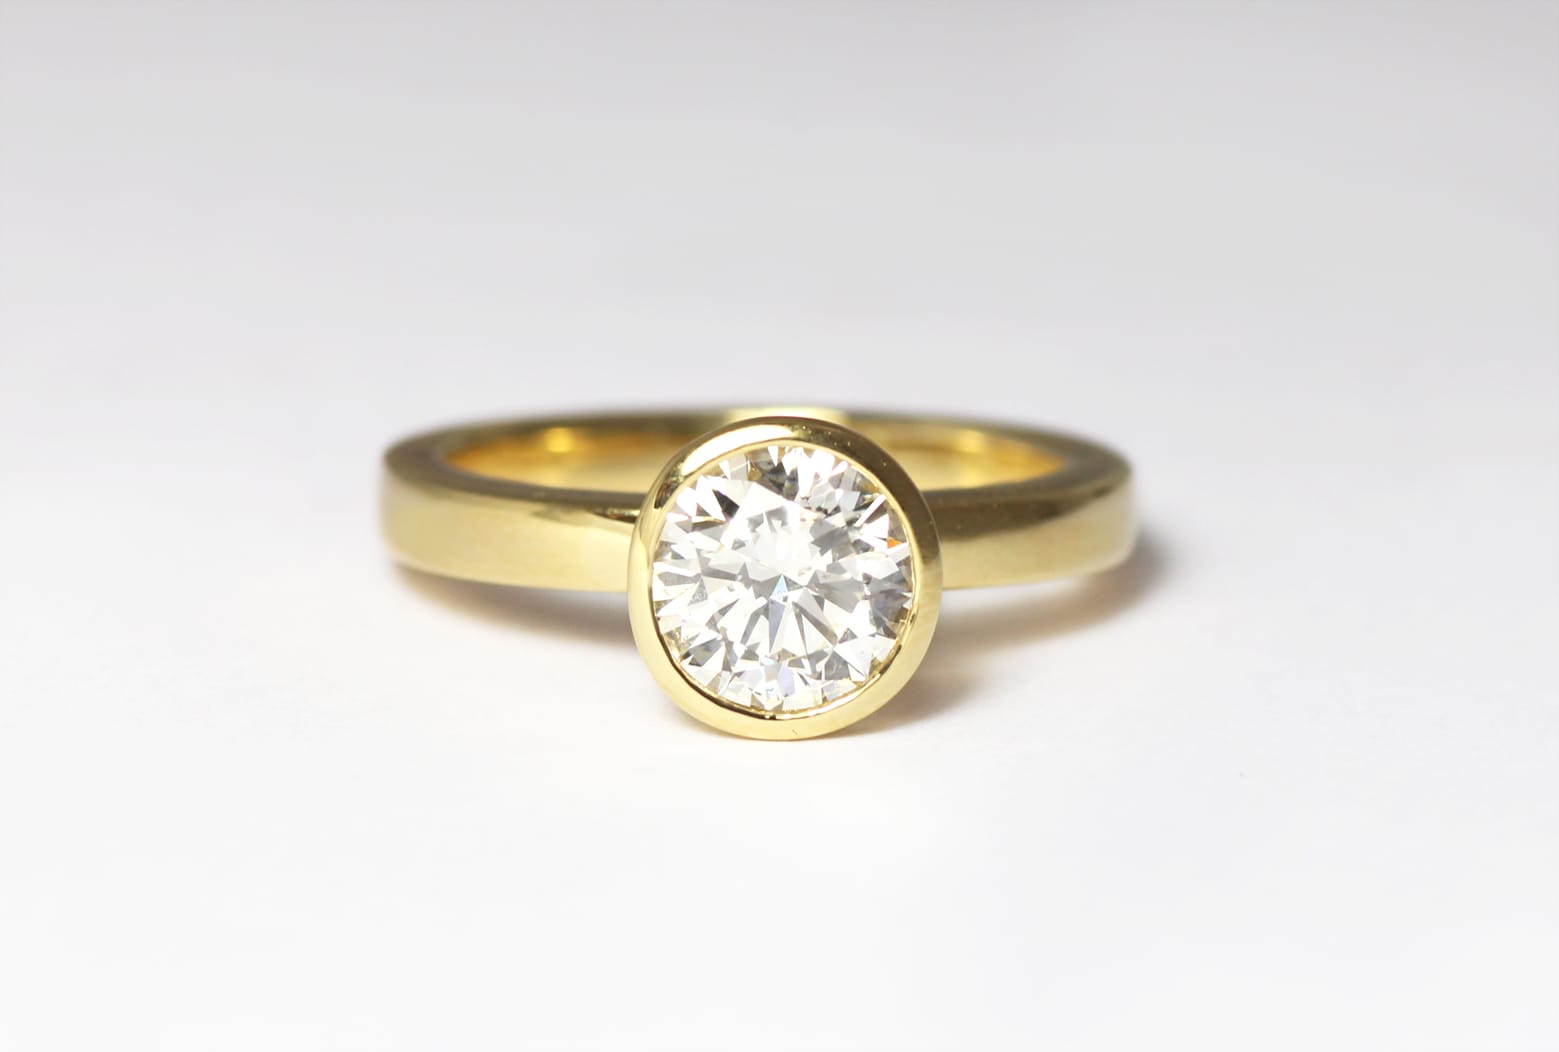 18ct Fairtrade gold with diamond by Zoe Pook Jewellery